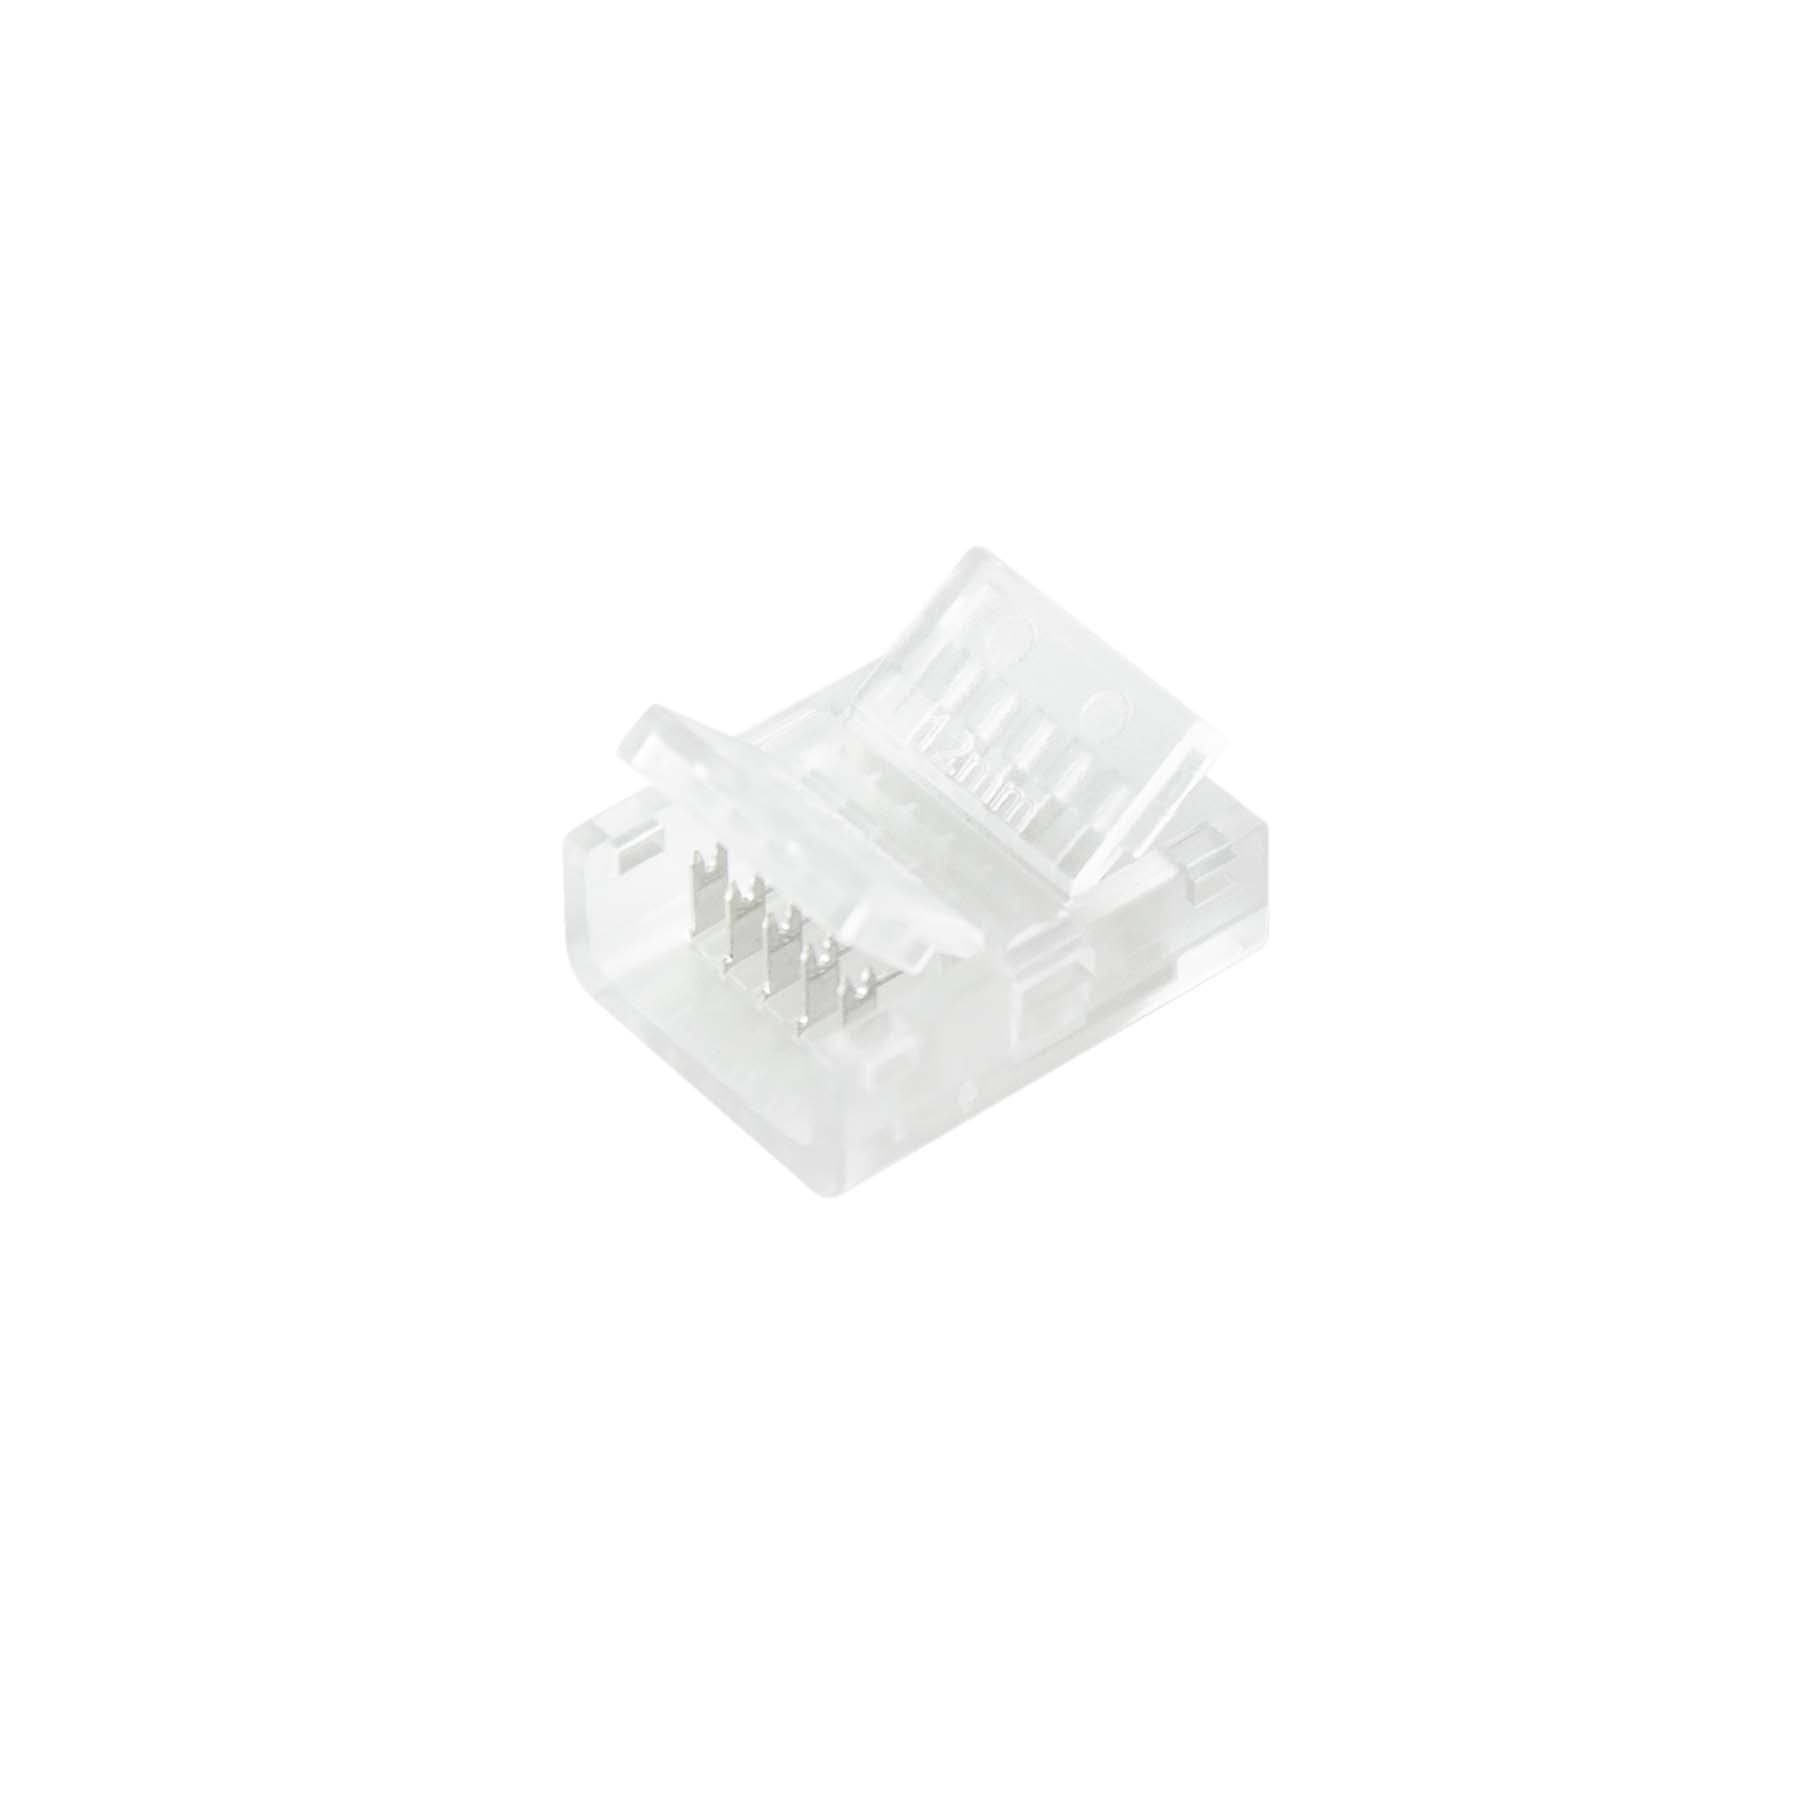 G.W.S LED Wholesale Strip Connectors 12mm / 5 6 Pin Straight Connector For RGBCCT LED Strip Lights